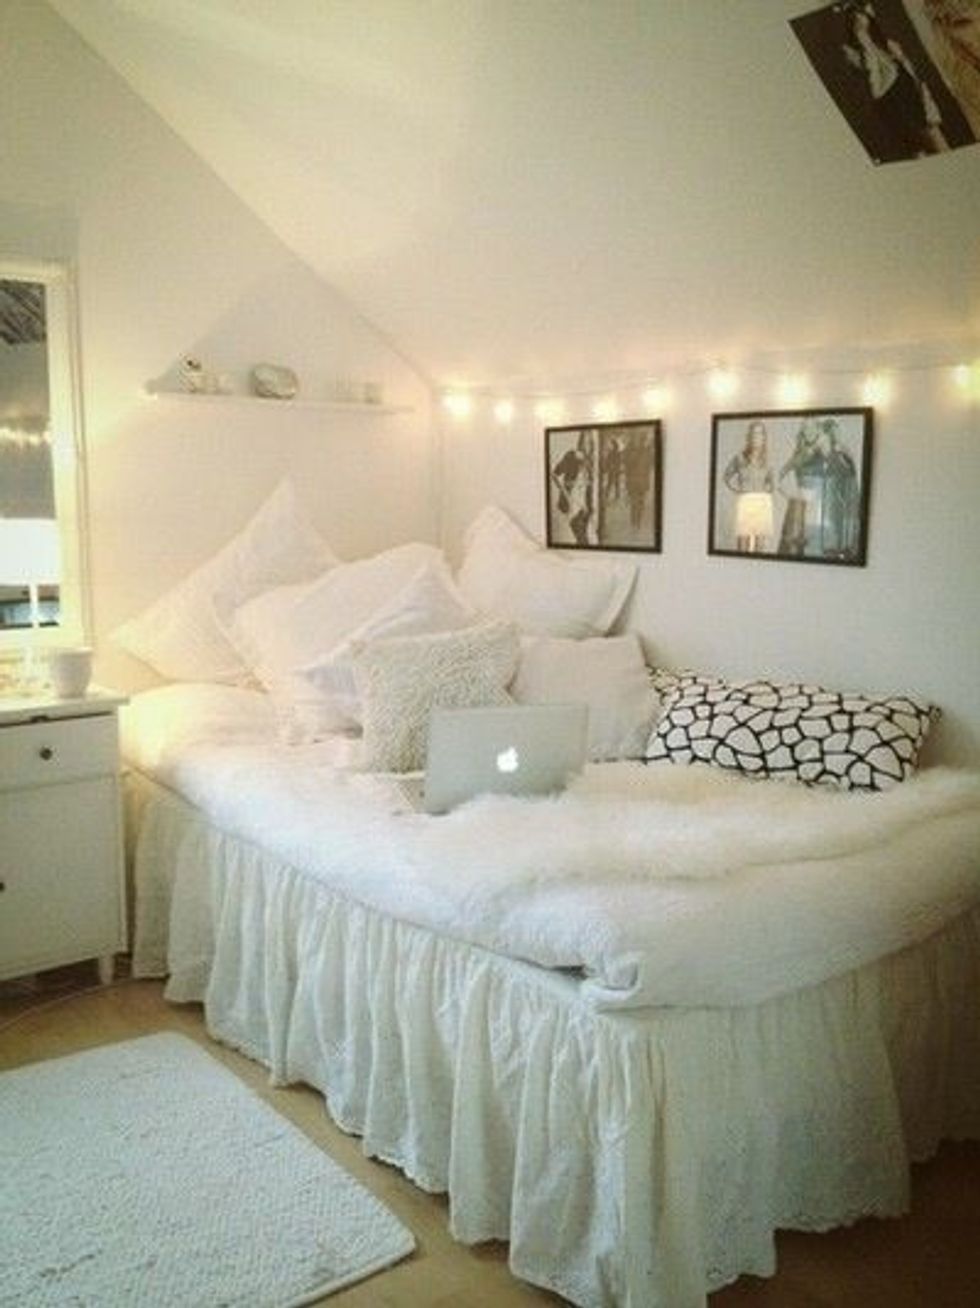 7 Ways To Make Your Room Tumblr-Worthy